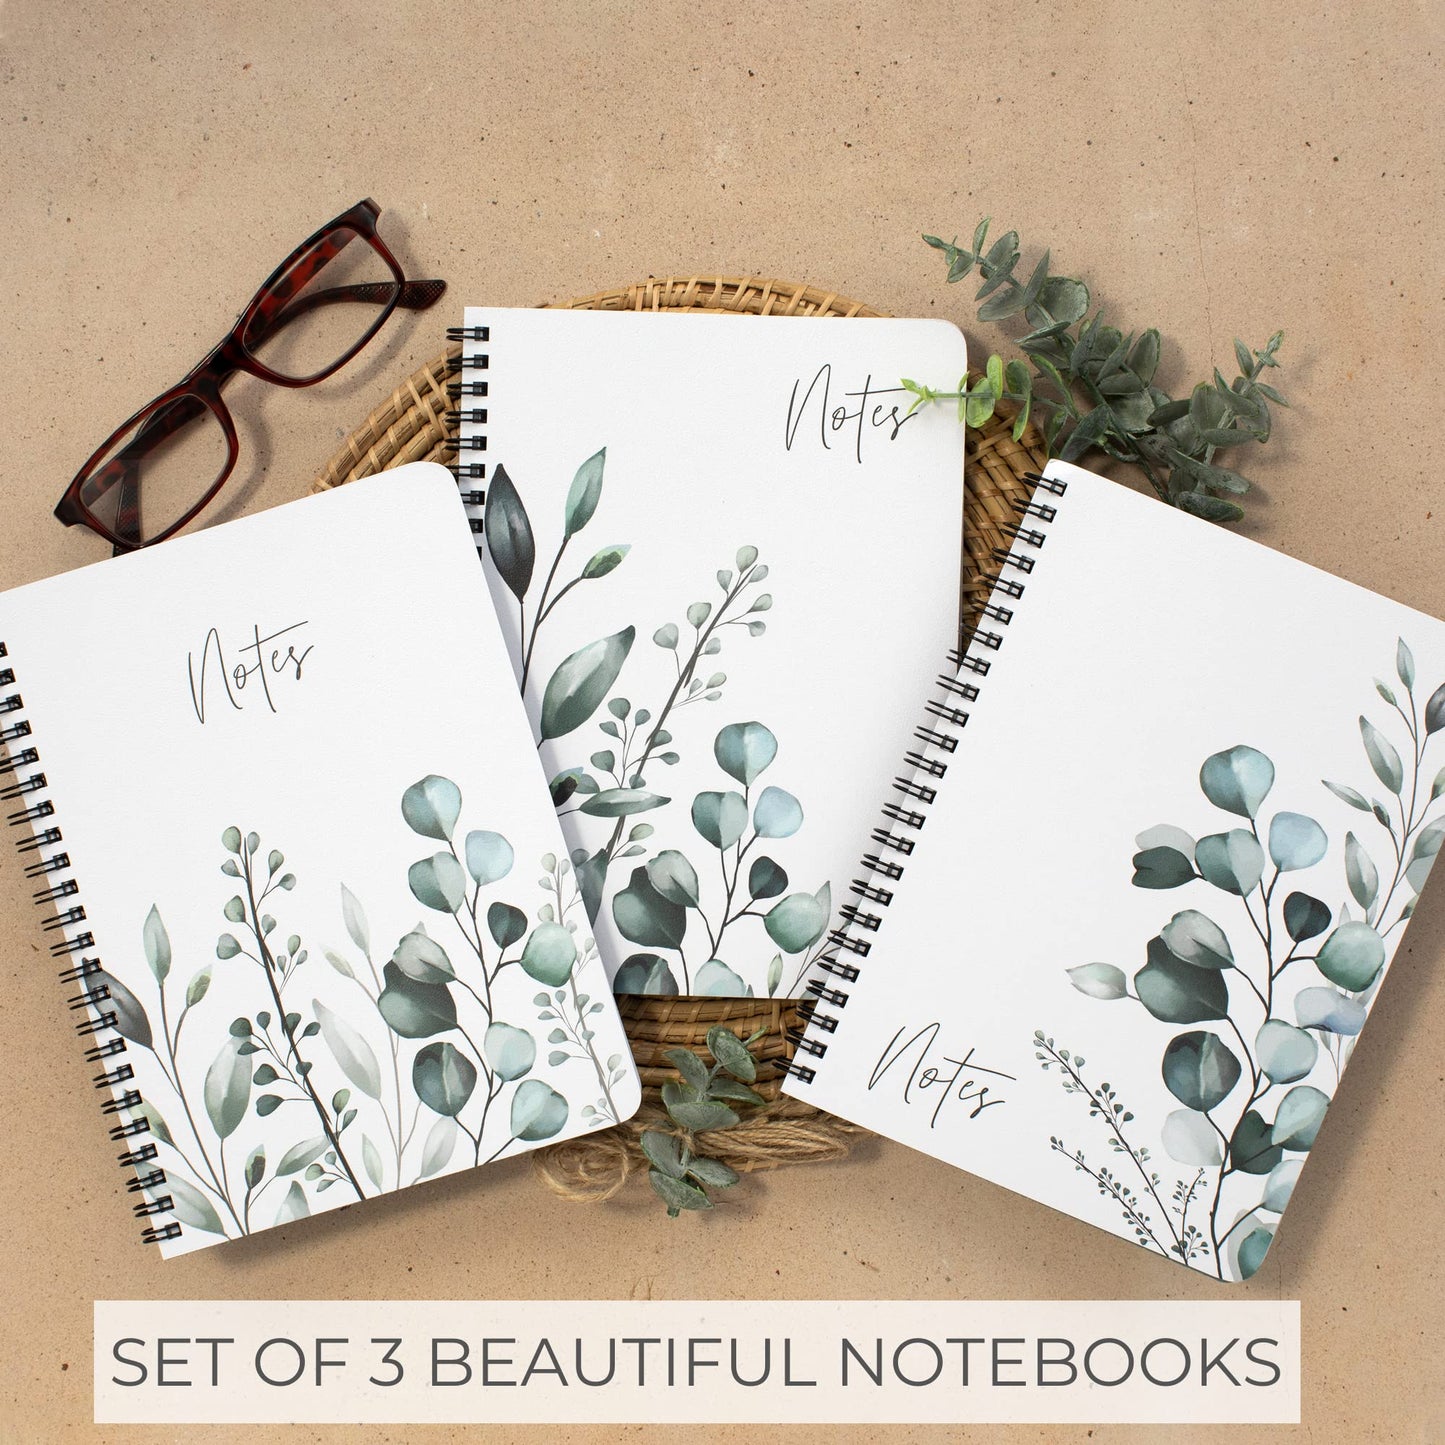 Aesthetic Spiral Notebook Set of 3 For Women - Cute College Ruled 8x6" Journal and Notebook With Large Pockets And Lined Pages - Perfect to Stay Organized and Boost Productivity at Work or School